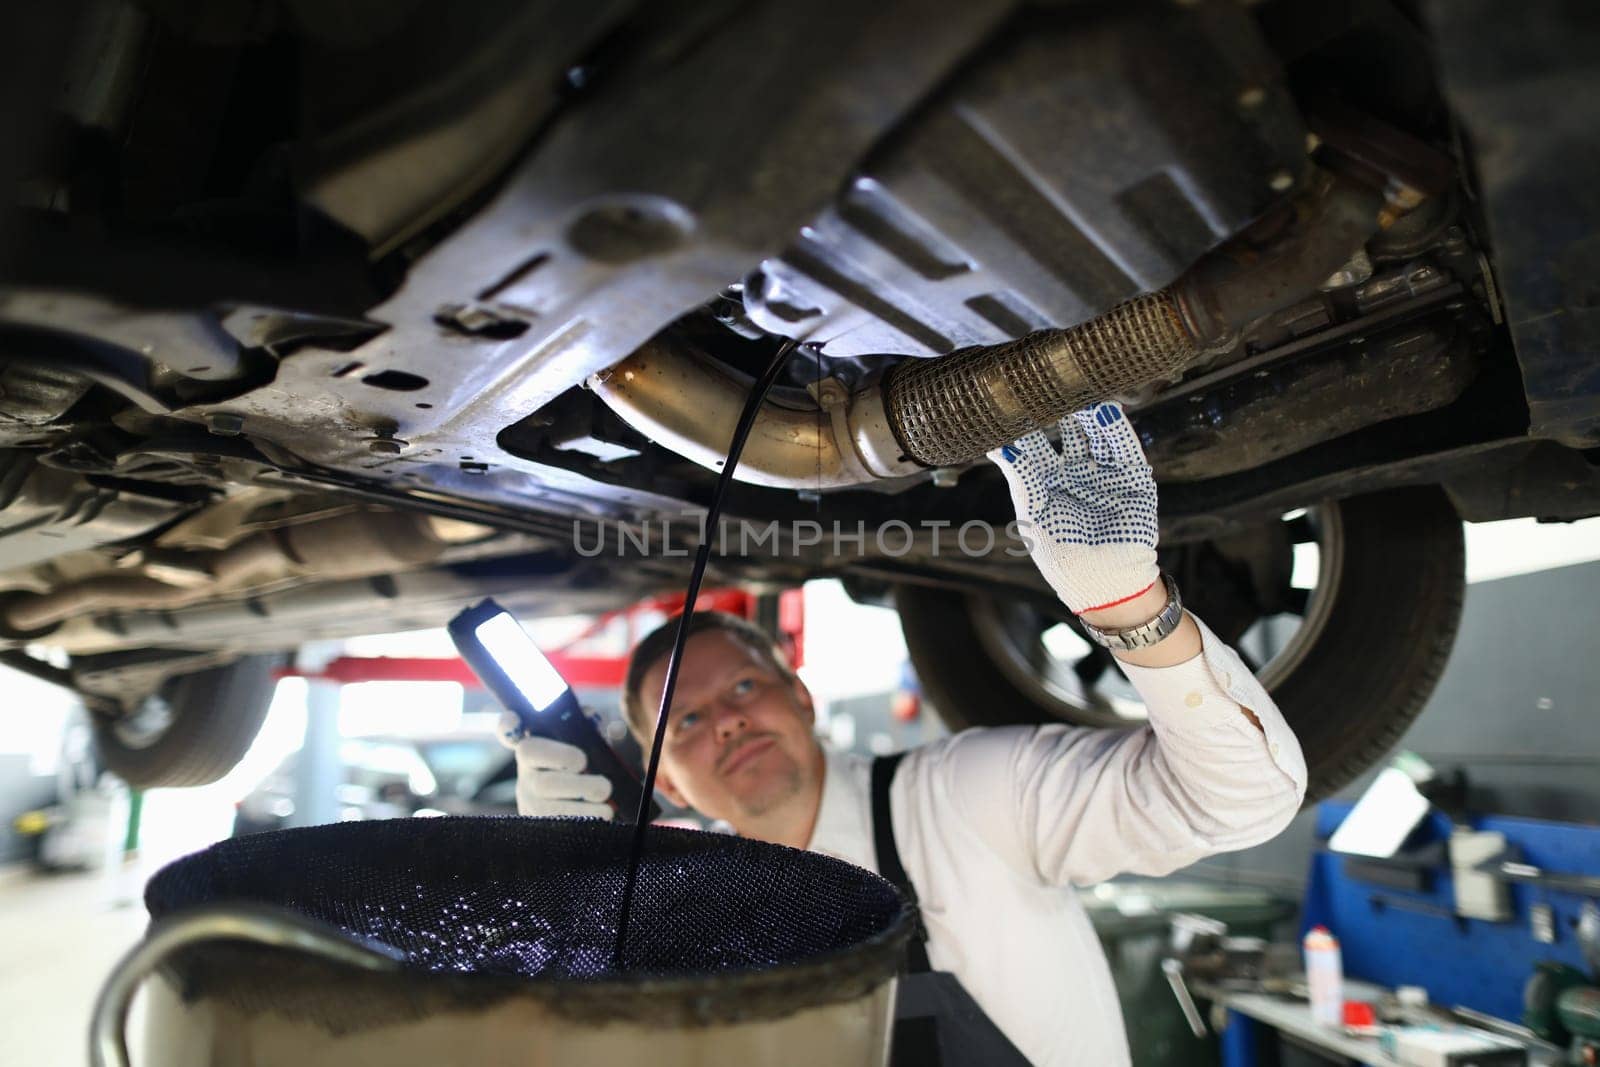 Mechanic with a lamp inspects suspension of car on lift. Auto repair and maintenance service